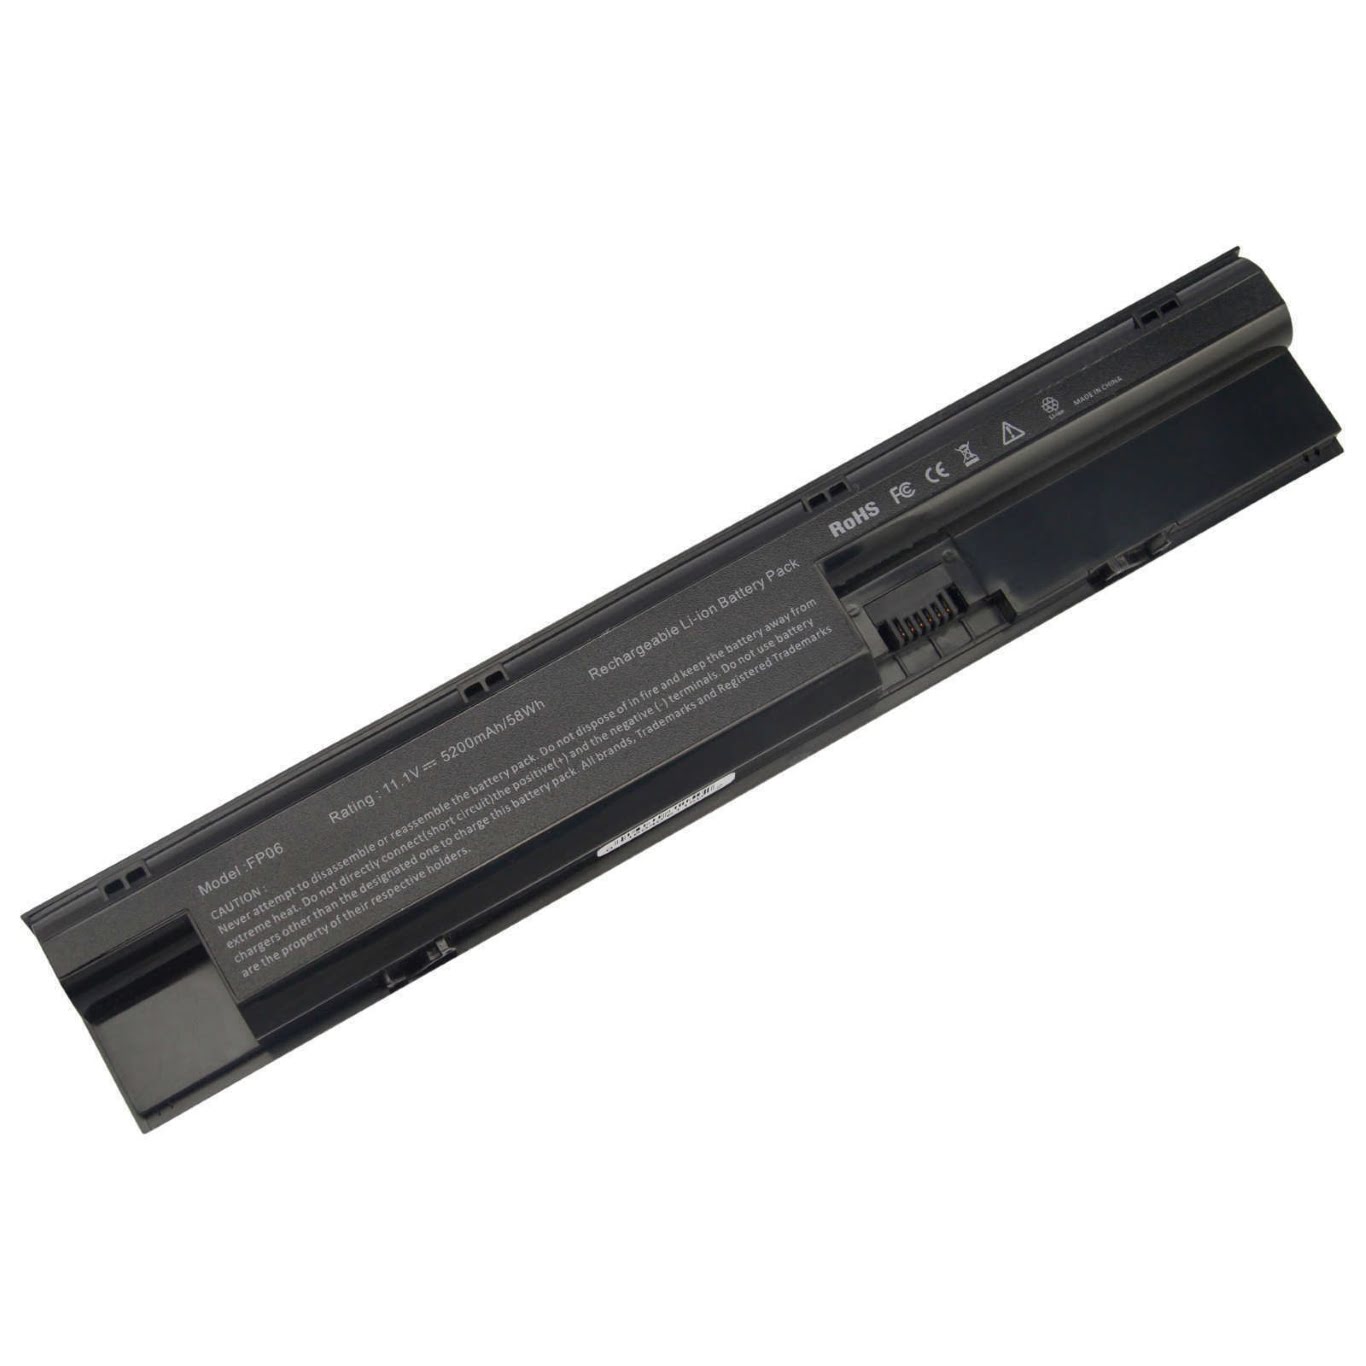 3ICR19/65-3, 707616-141 replacement Laptop Battery for HP ProBook 440 G0 Series, ProBook 440 G1 Series, 11.1V, 5200mAh, 6 cells